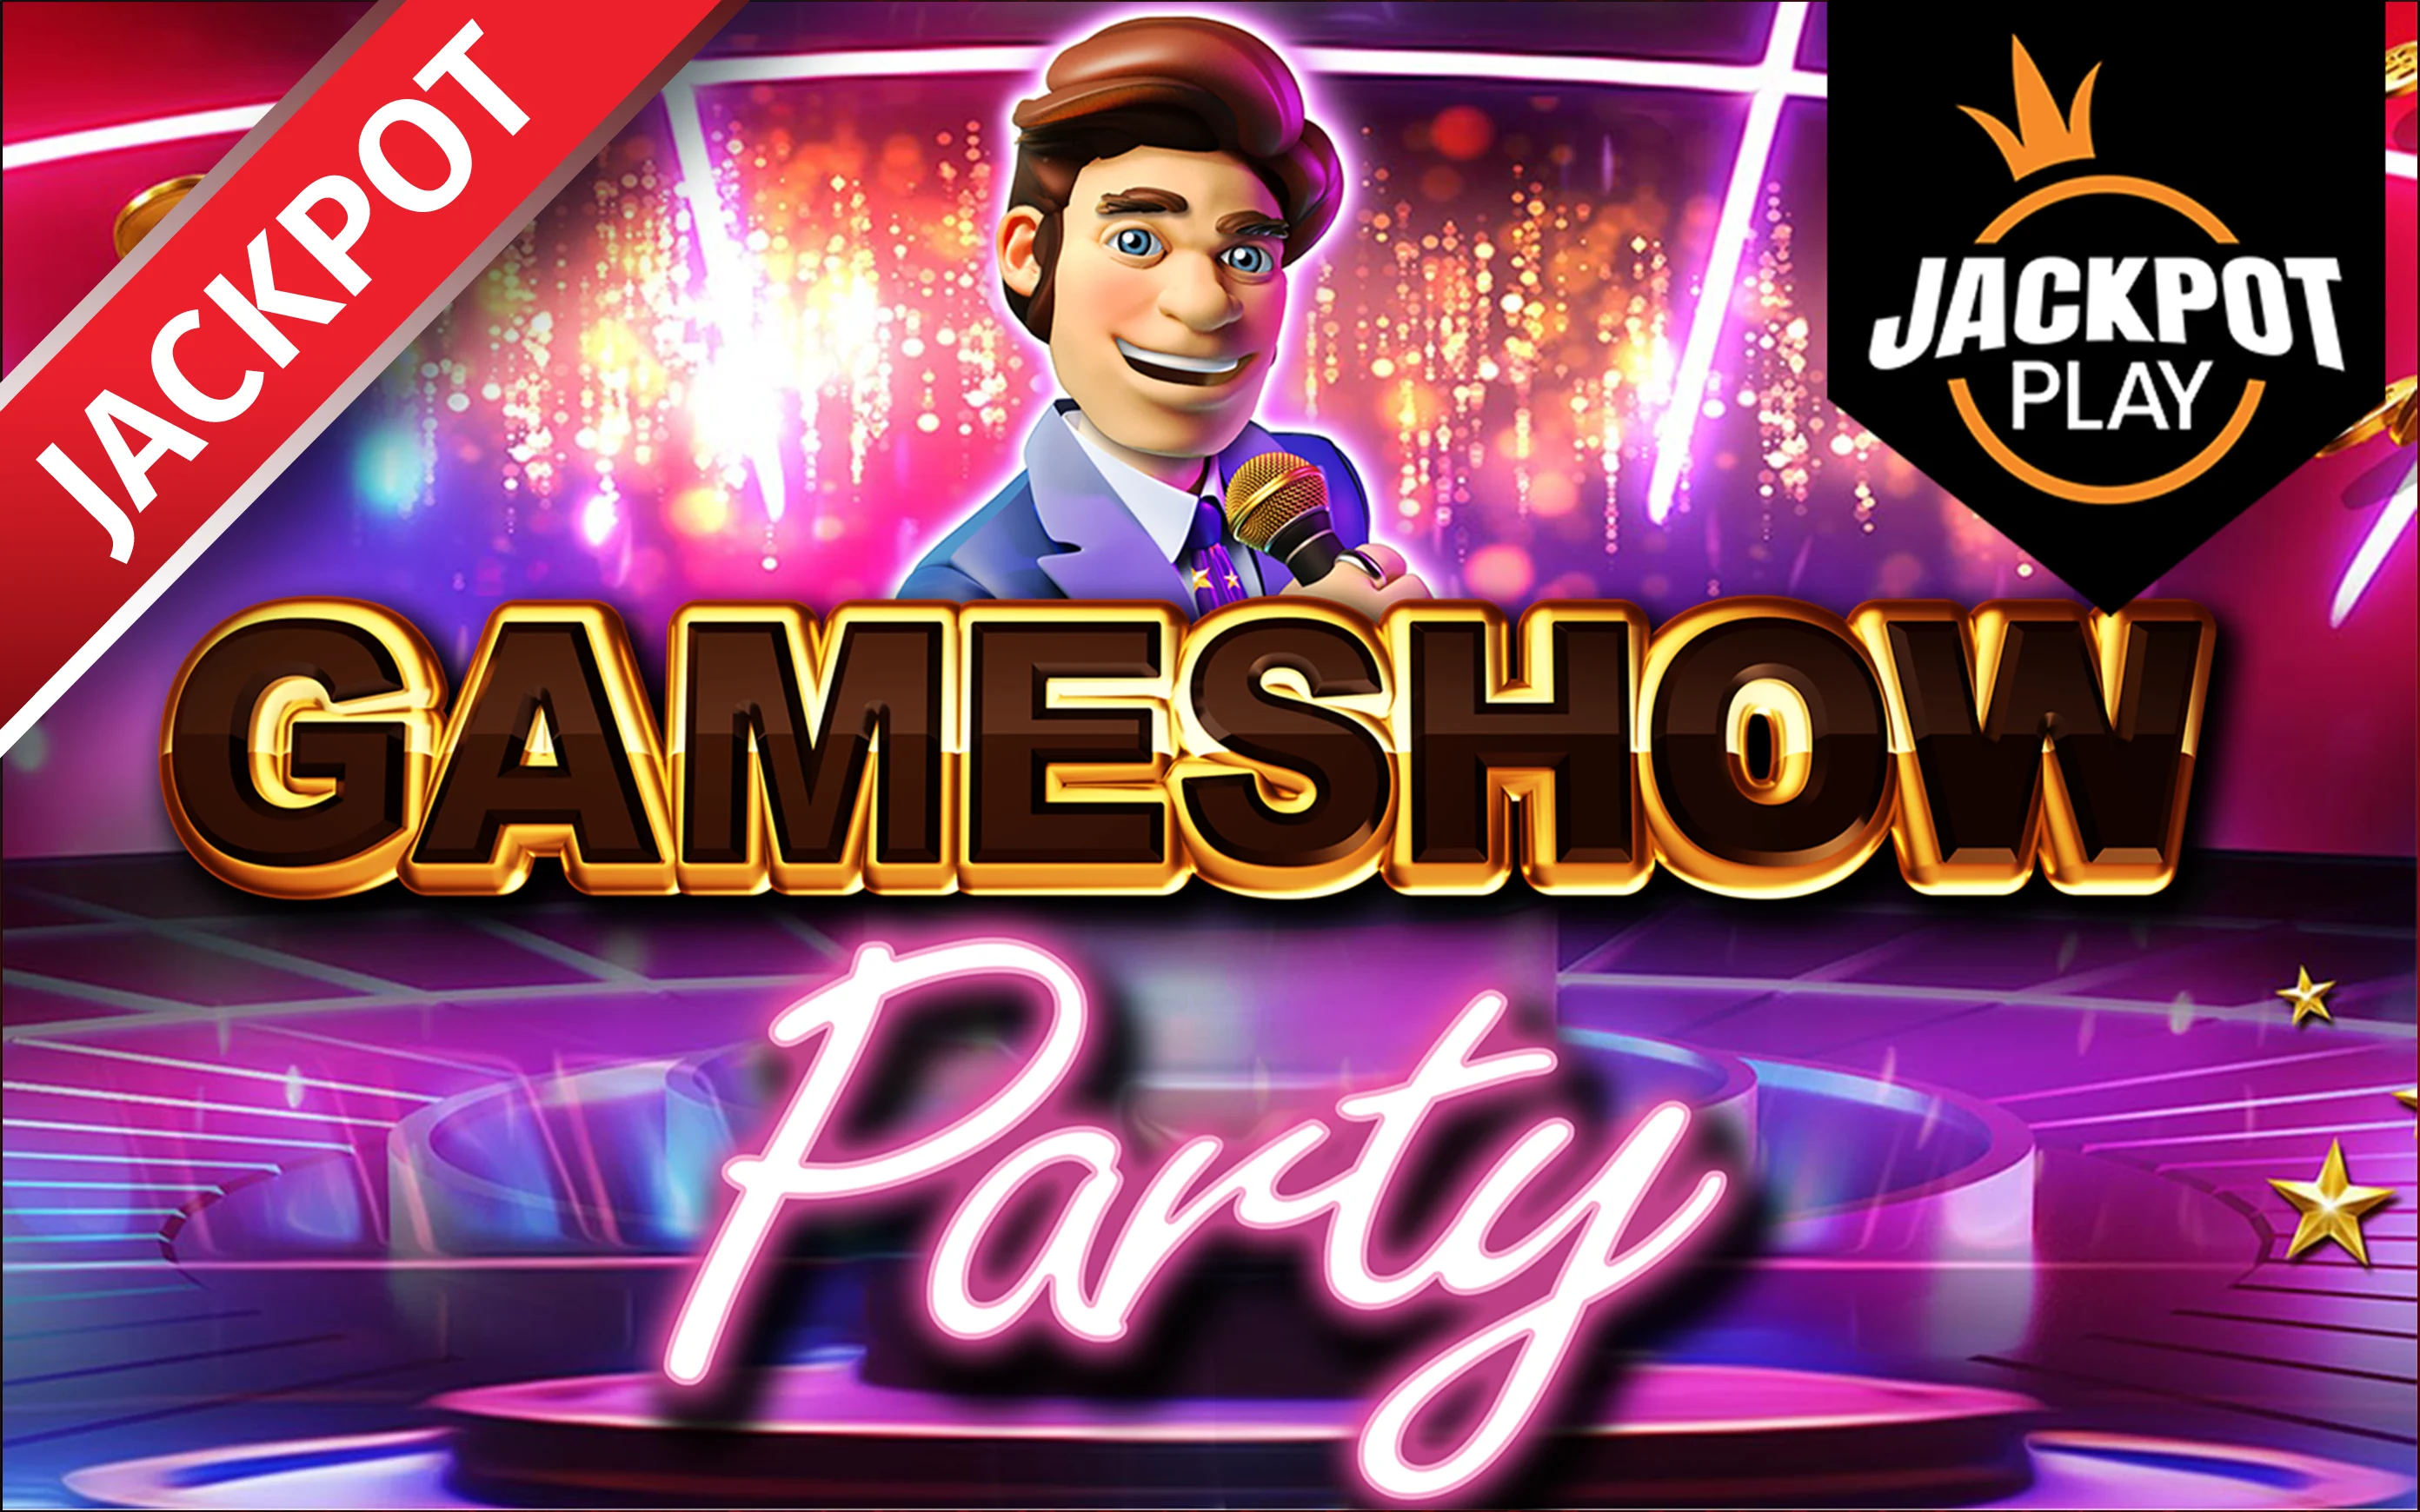 Spil Gameshow Party Jackpot Play på Starcasino.be online kasino
